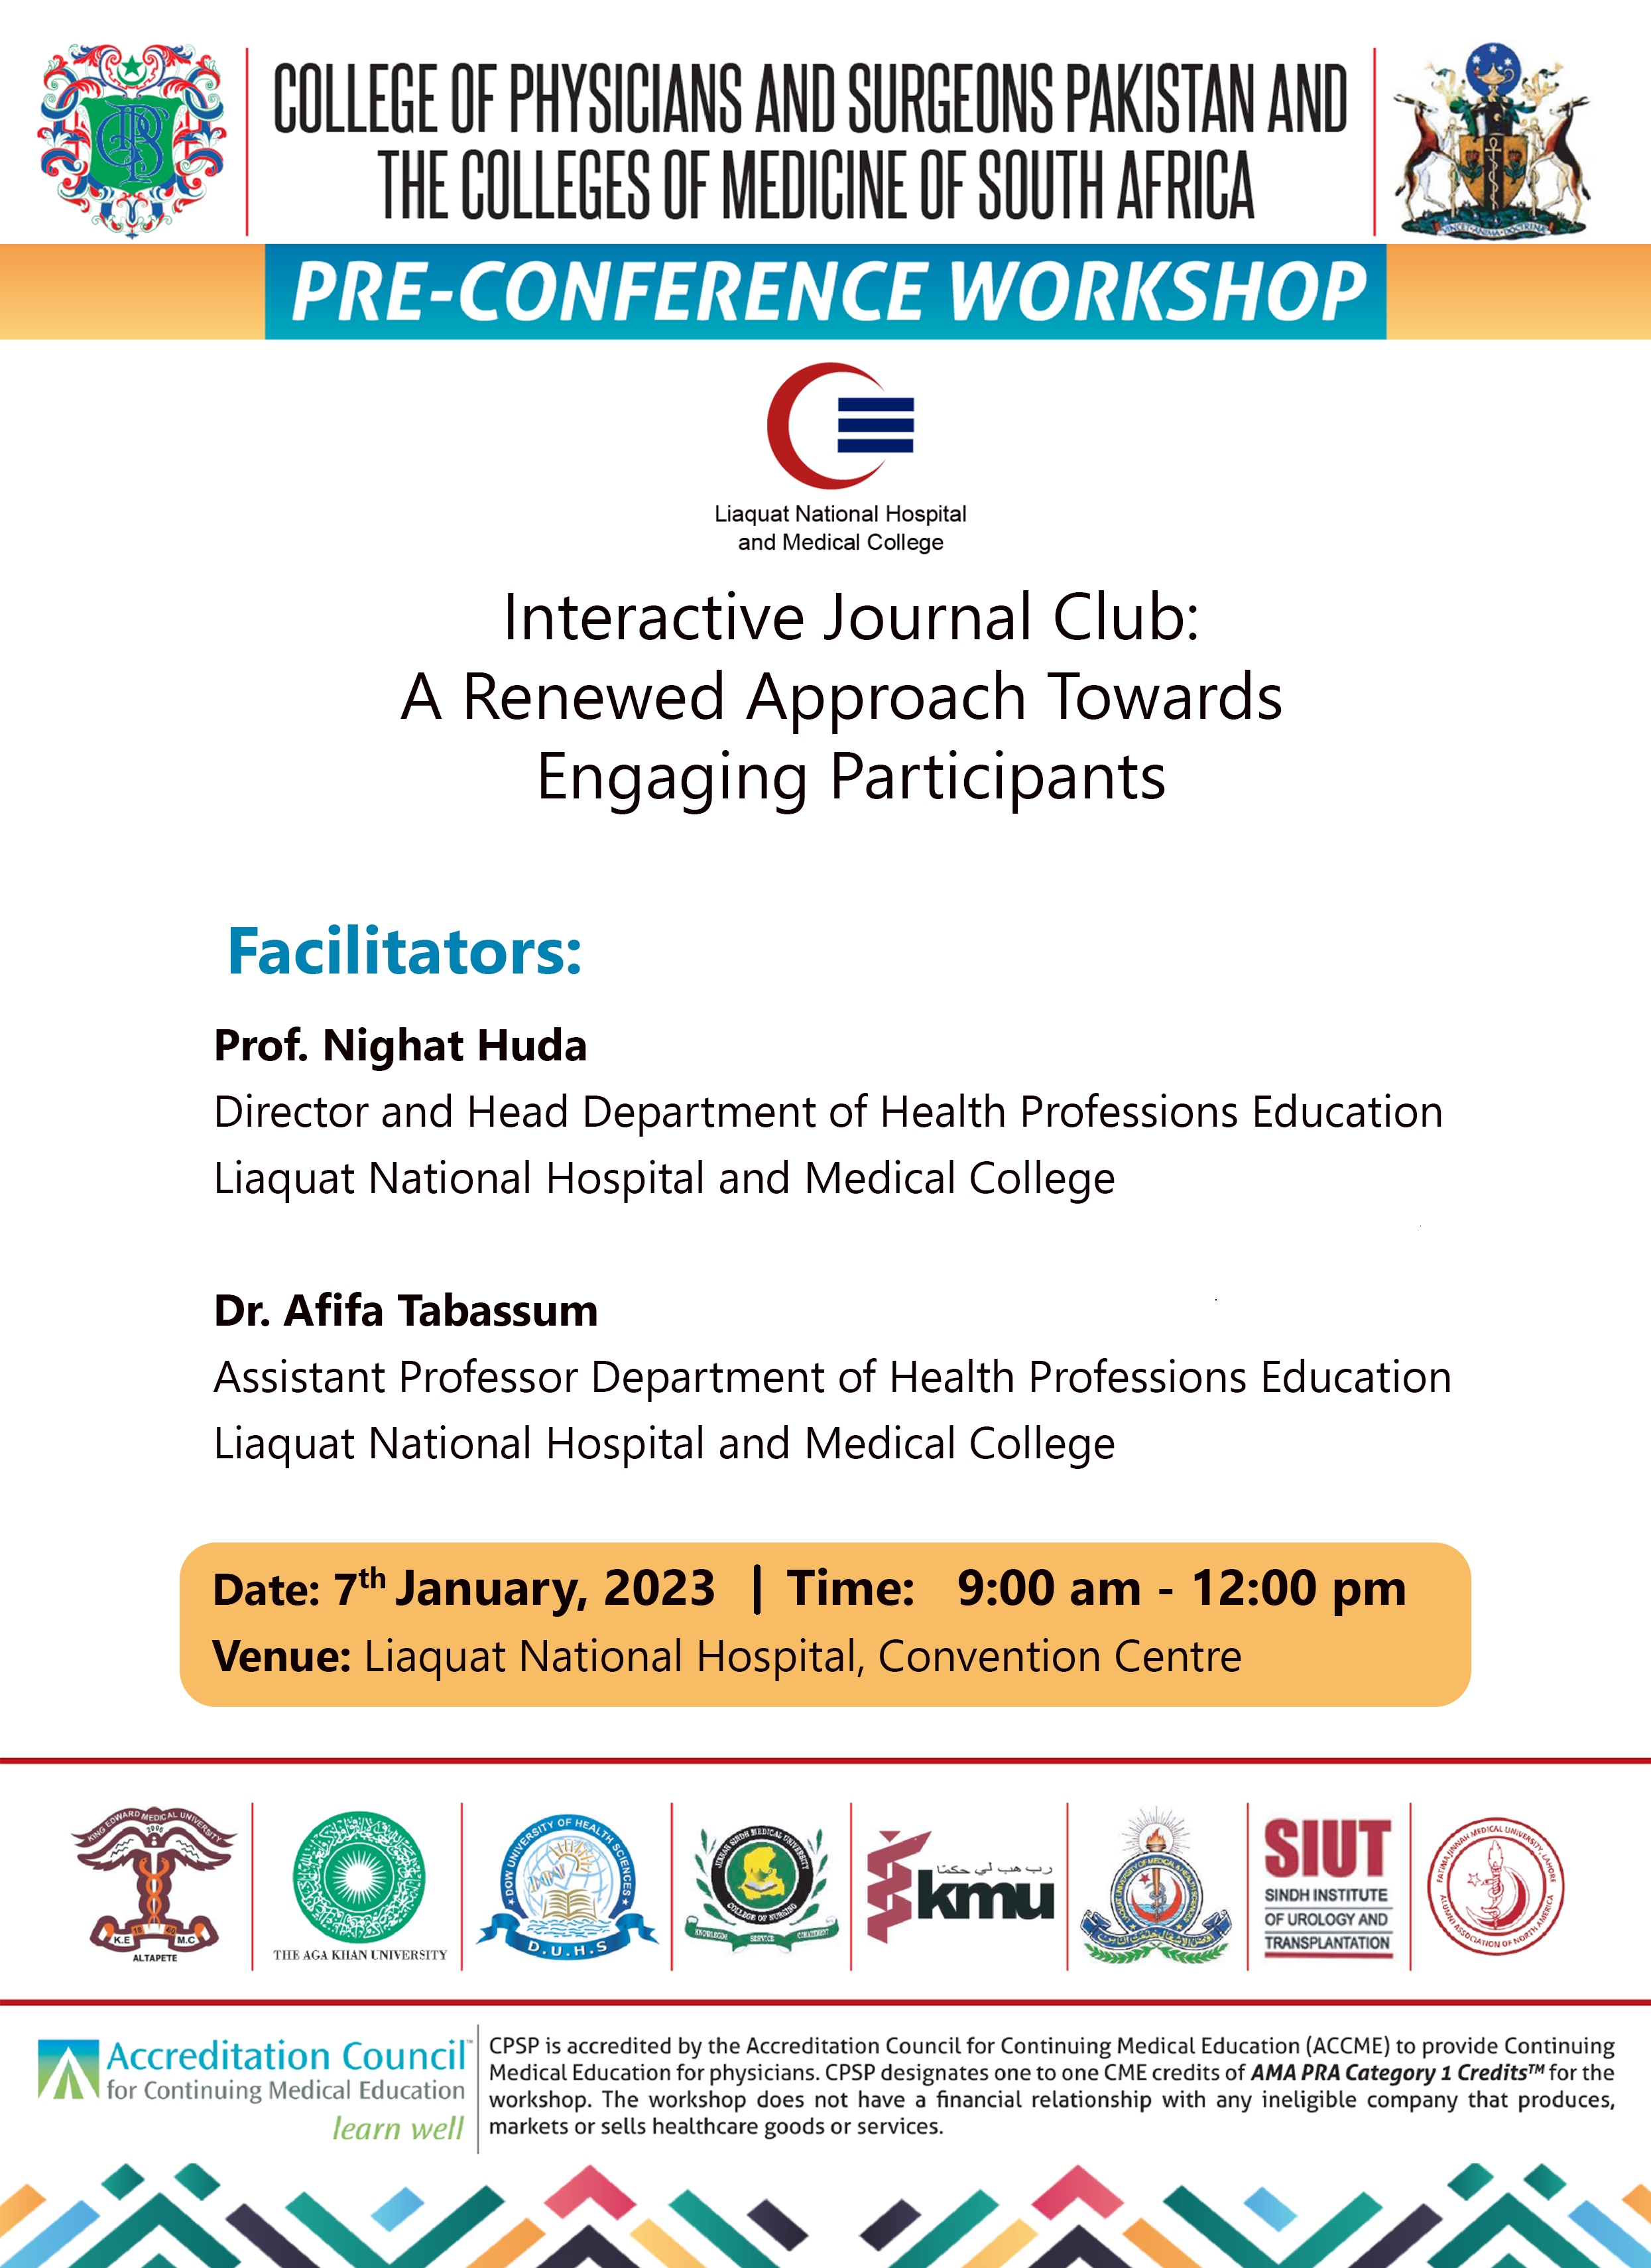 Pre-conference Workshop- Interactive Journal Club: A Renewed Approach towards Engaging Participants